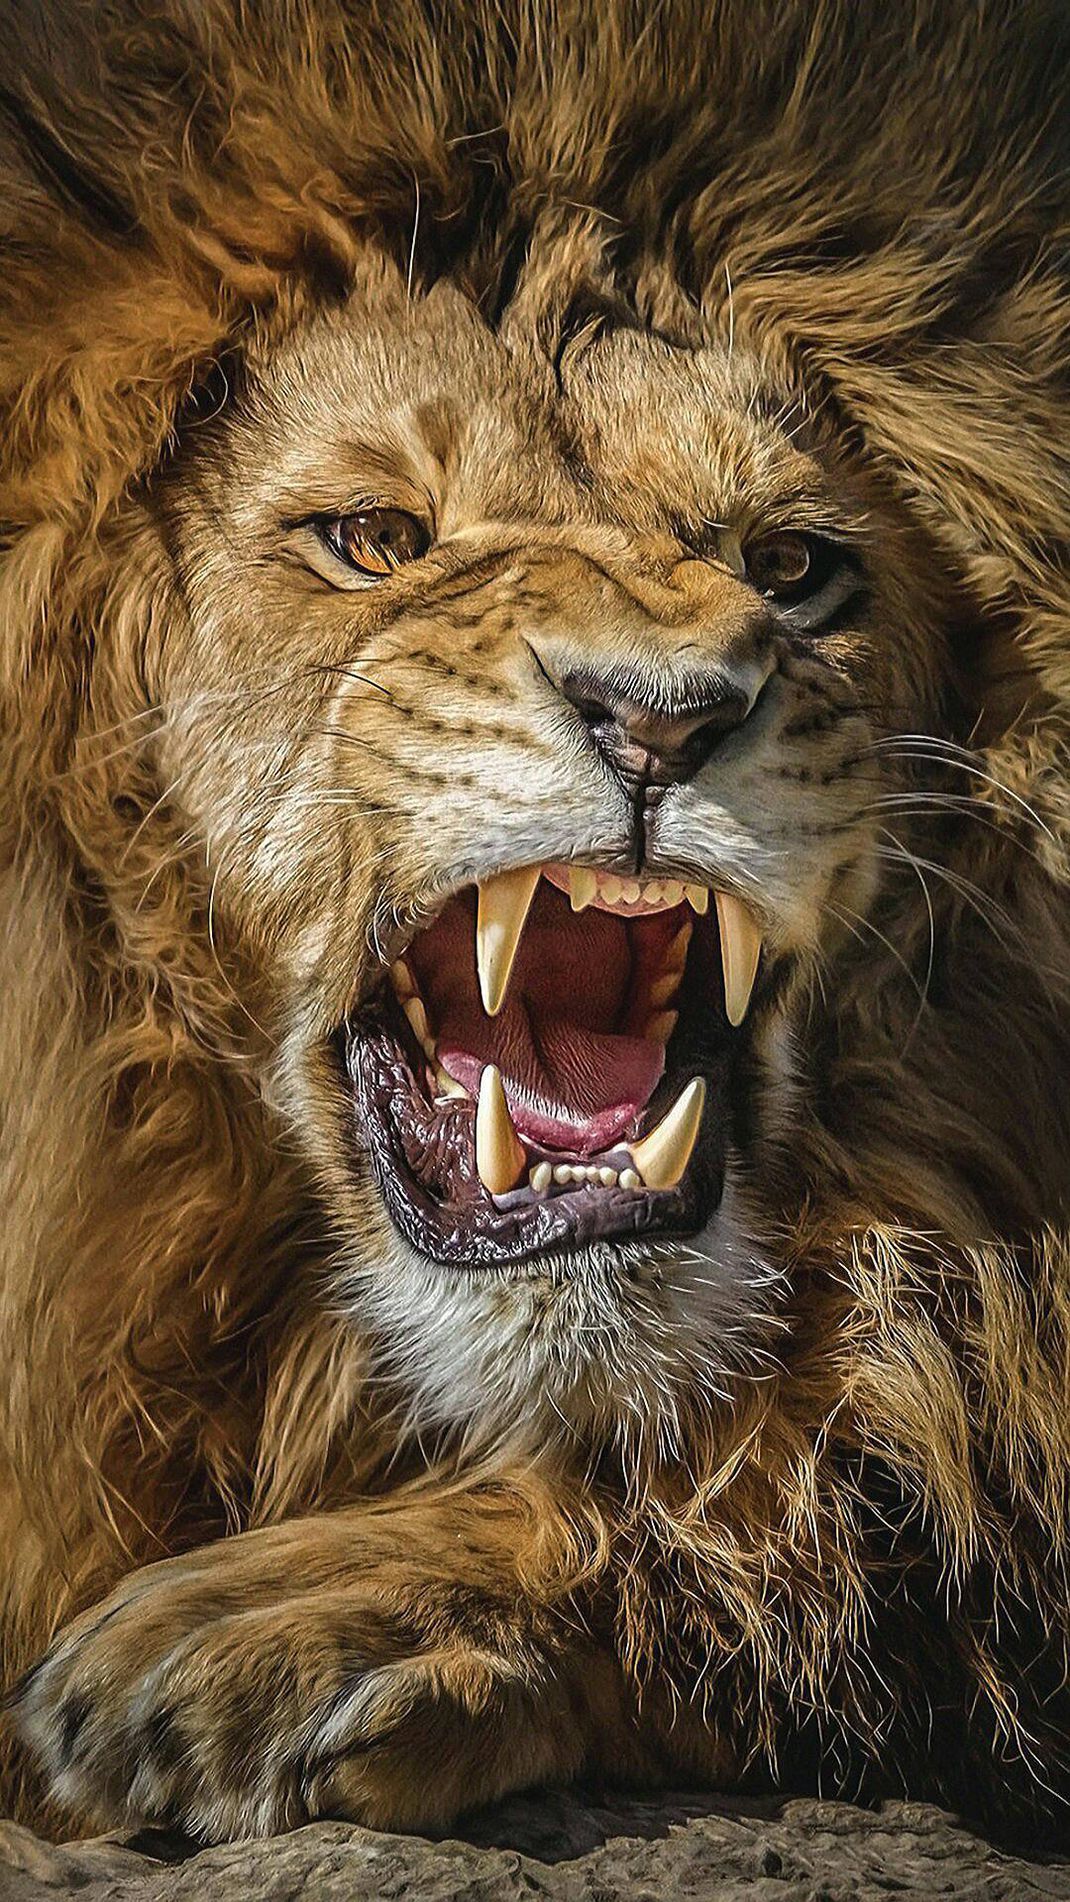 Great Lion Ultra HD Wallpaper For Andriod Download In Link For HD result. Lion photography, Lion picture, Lion image